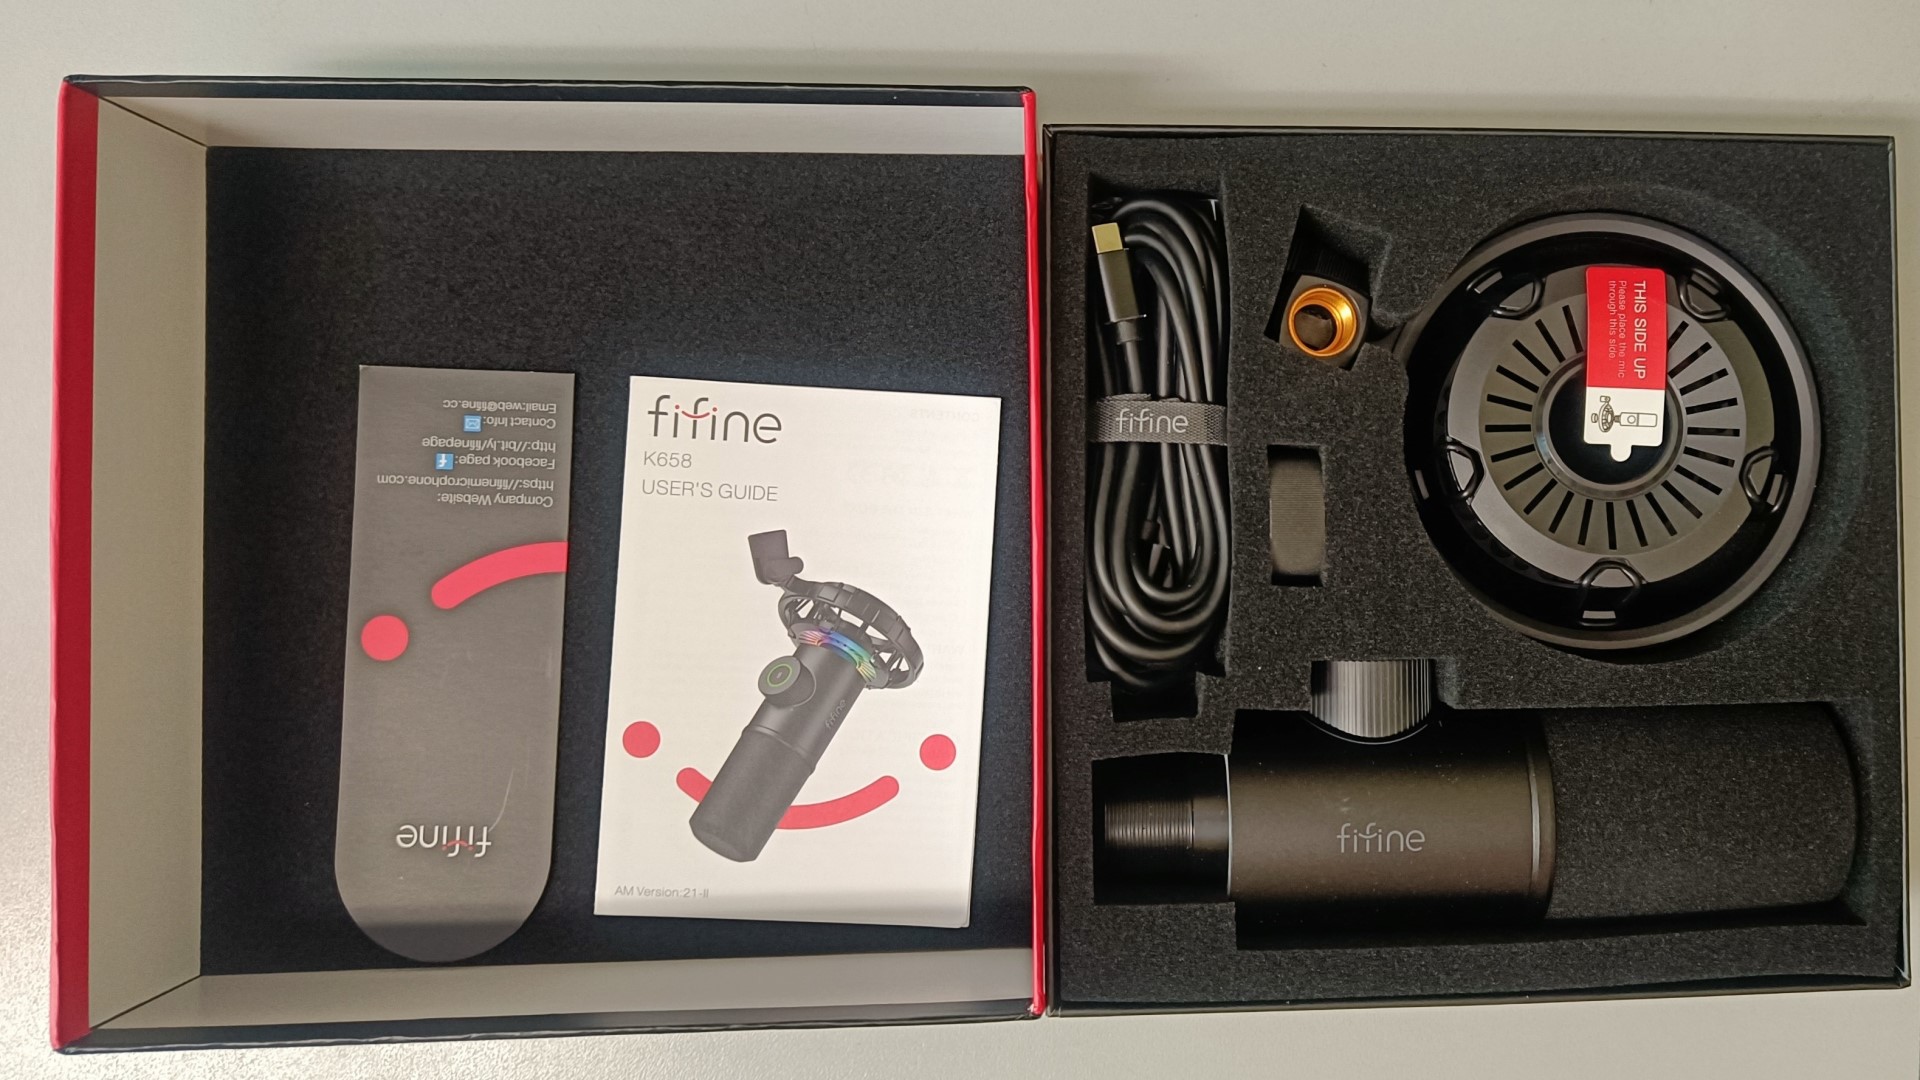 FIFINE K658 USB Dynamic Cardioid Microphone Review @FIFINEMIC - Impulse  Gamer